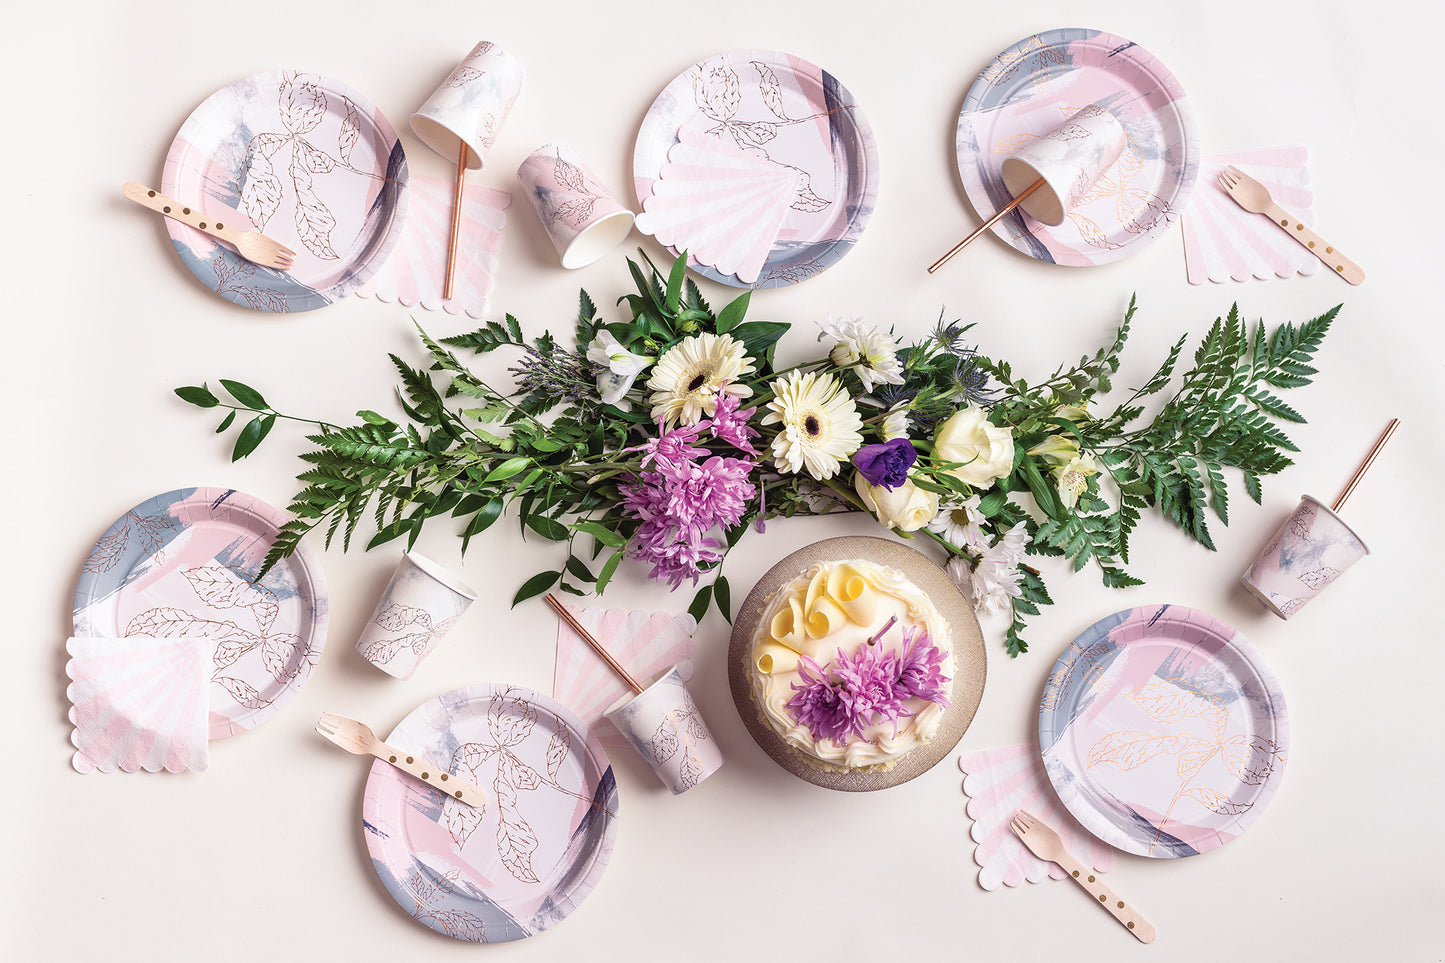 Floral Tabletop Party Pack